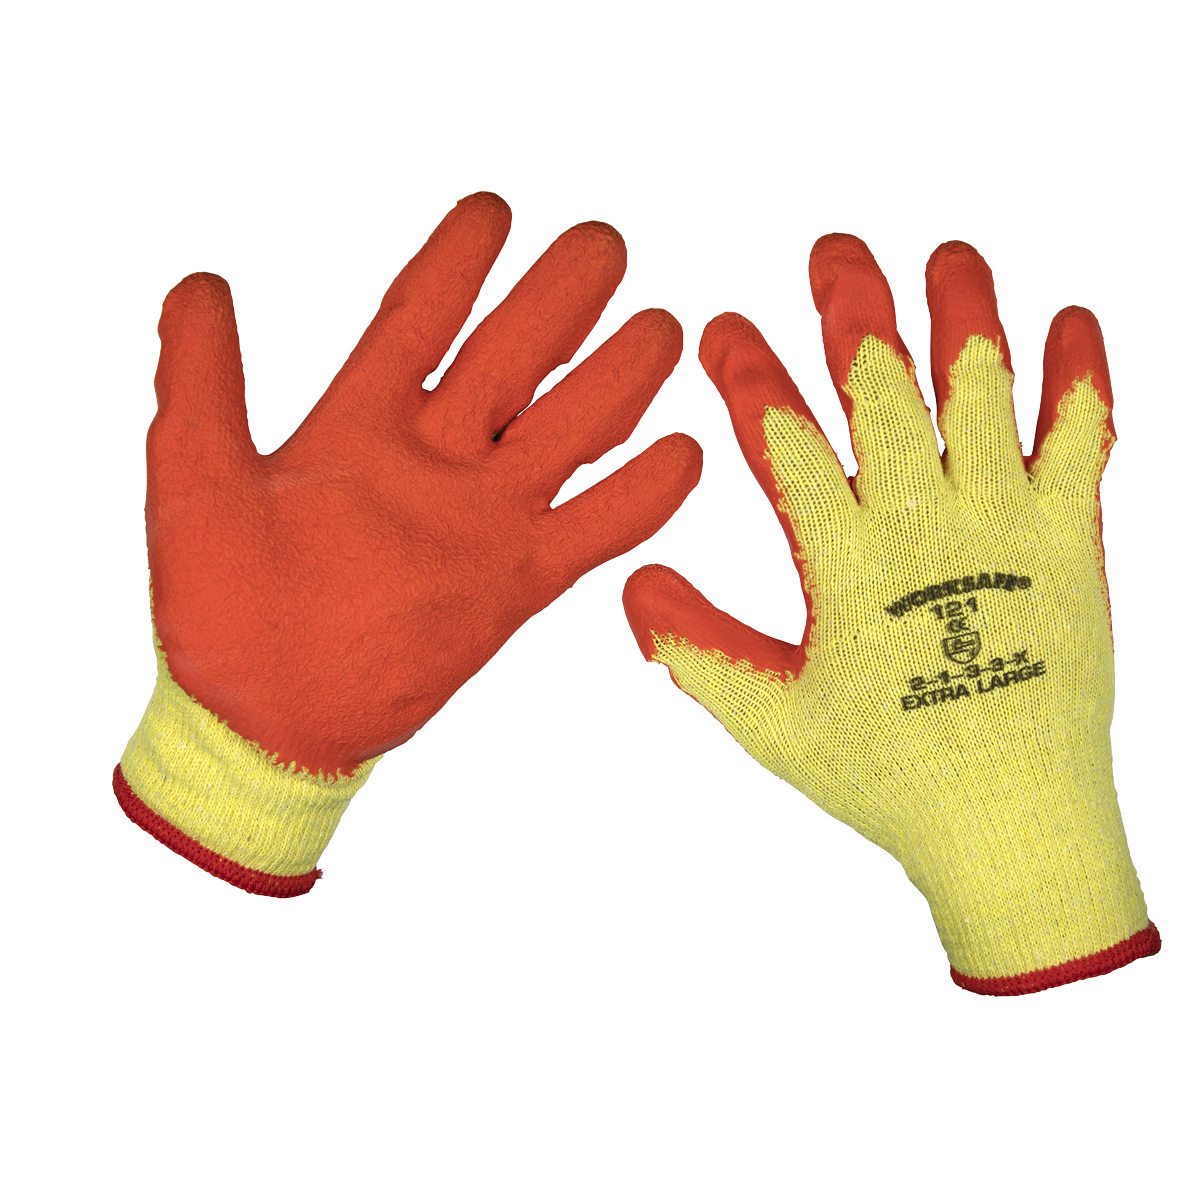 Super Grip Knitted Gloves Latex Palm (X-Large) - Pack of 120 Pairs - 9121XL/B120 - Farming Parts